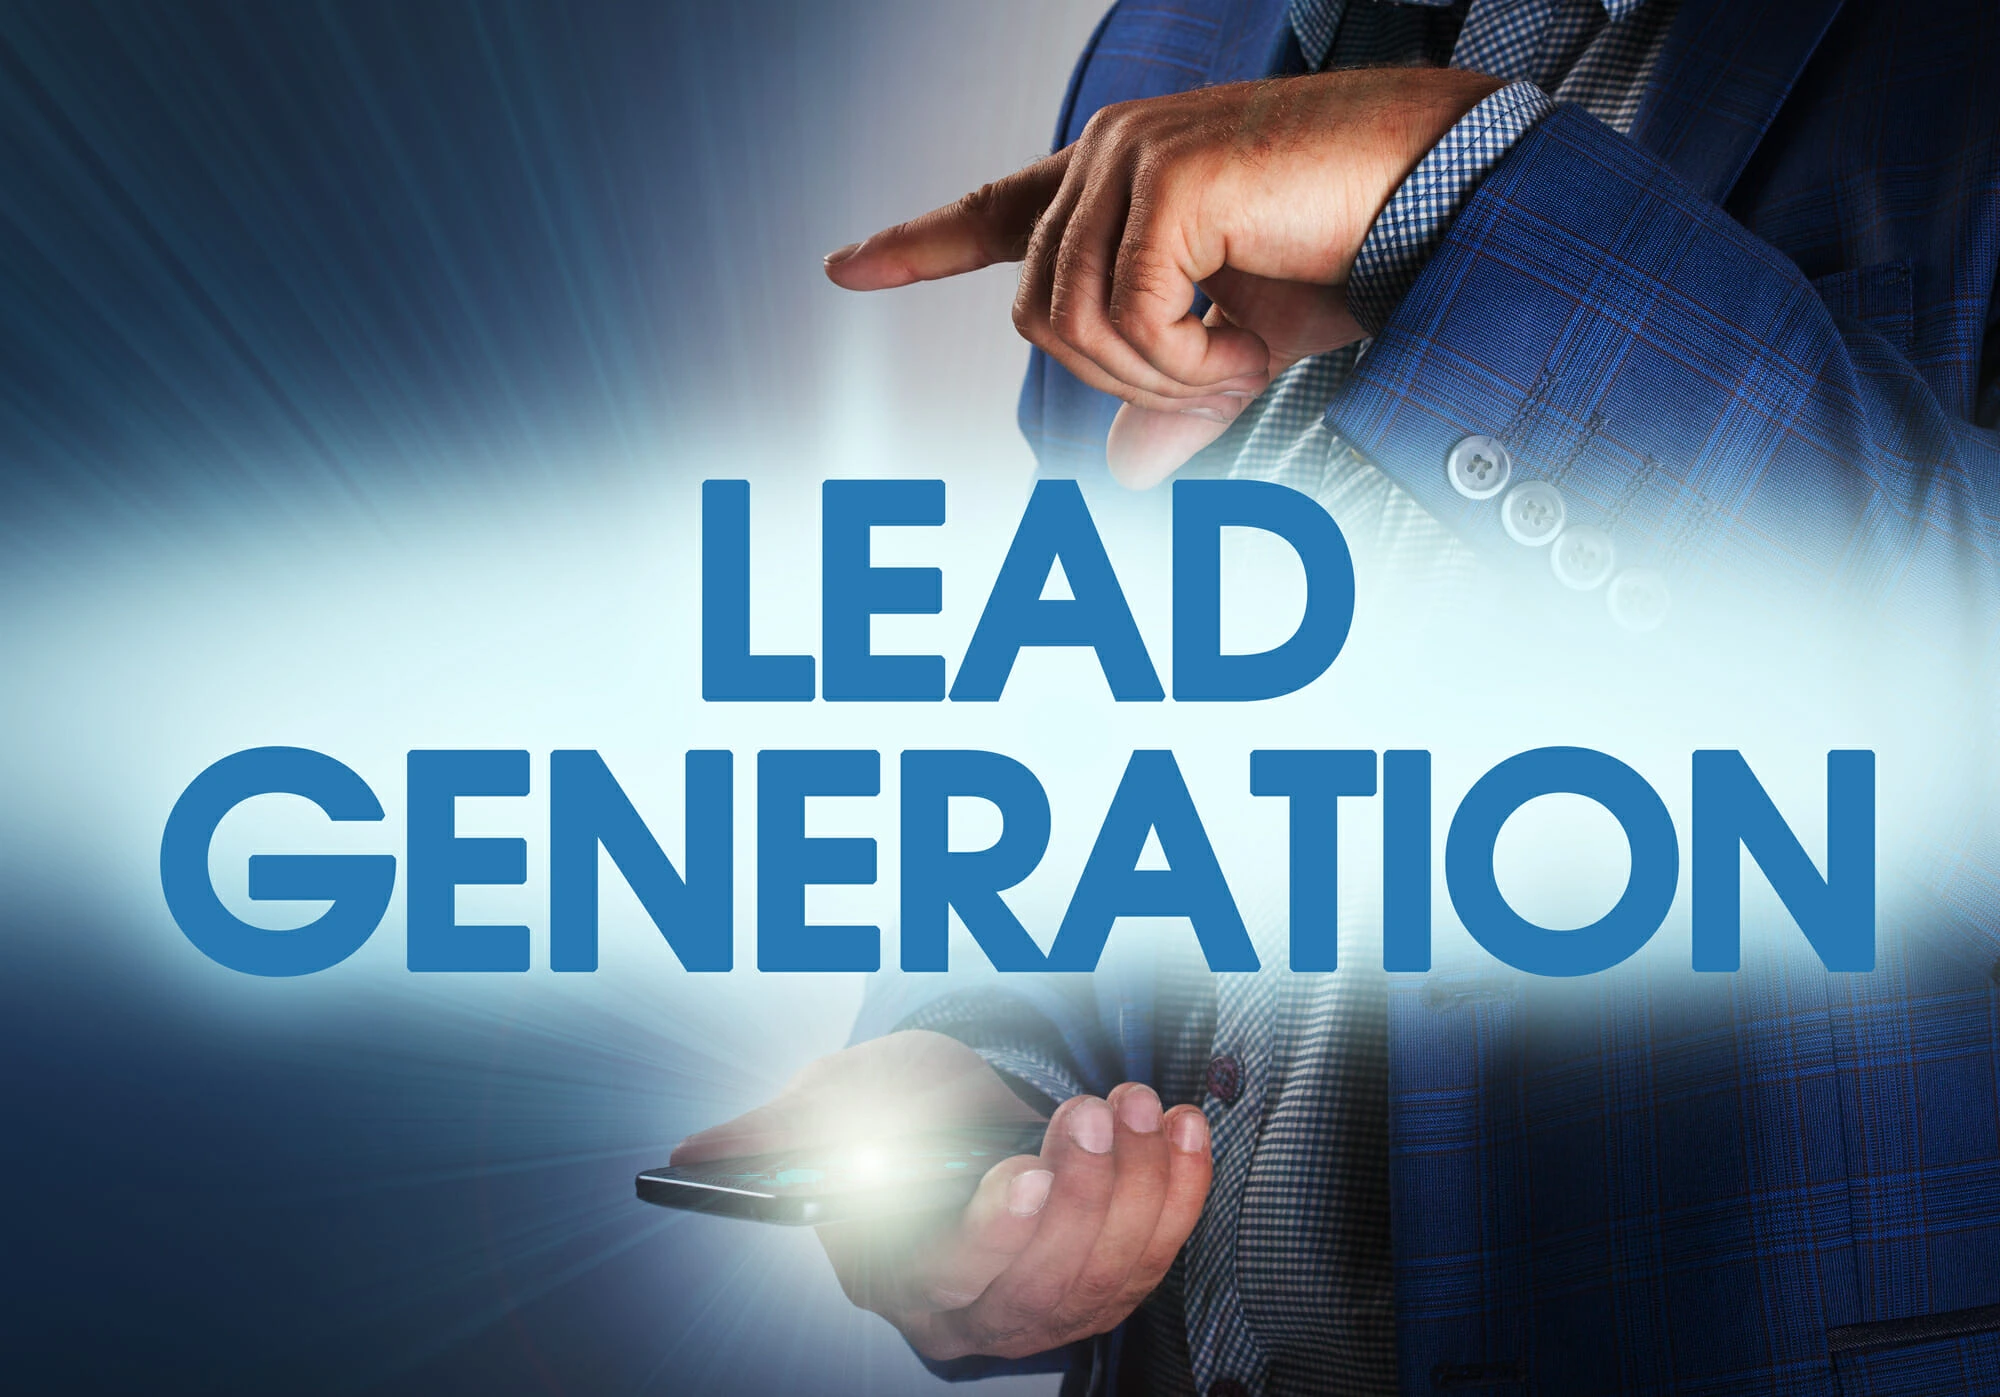 Lead Generation Services In Denver